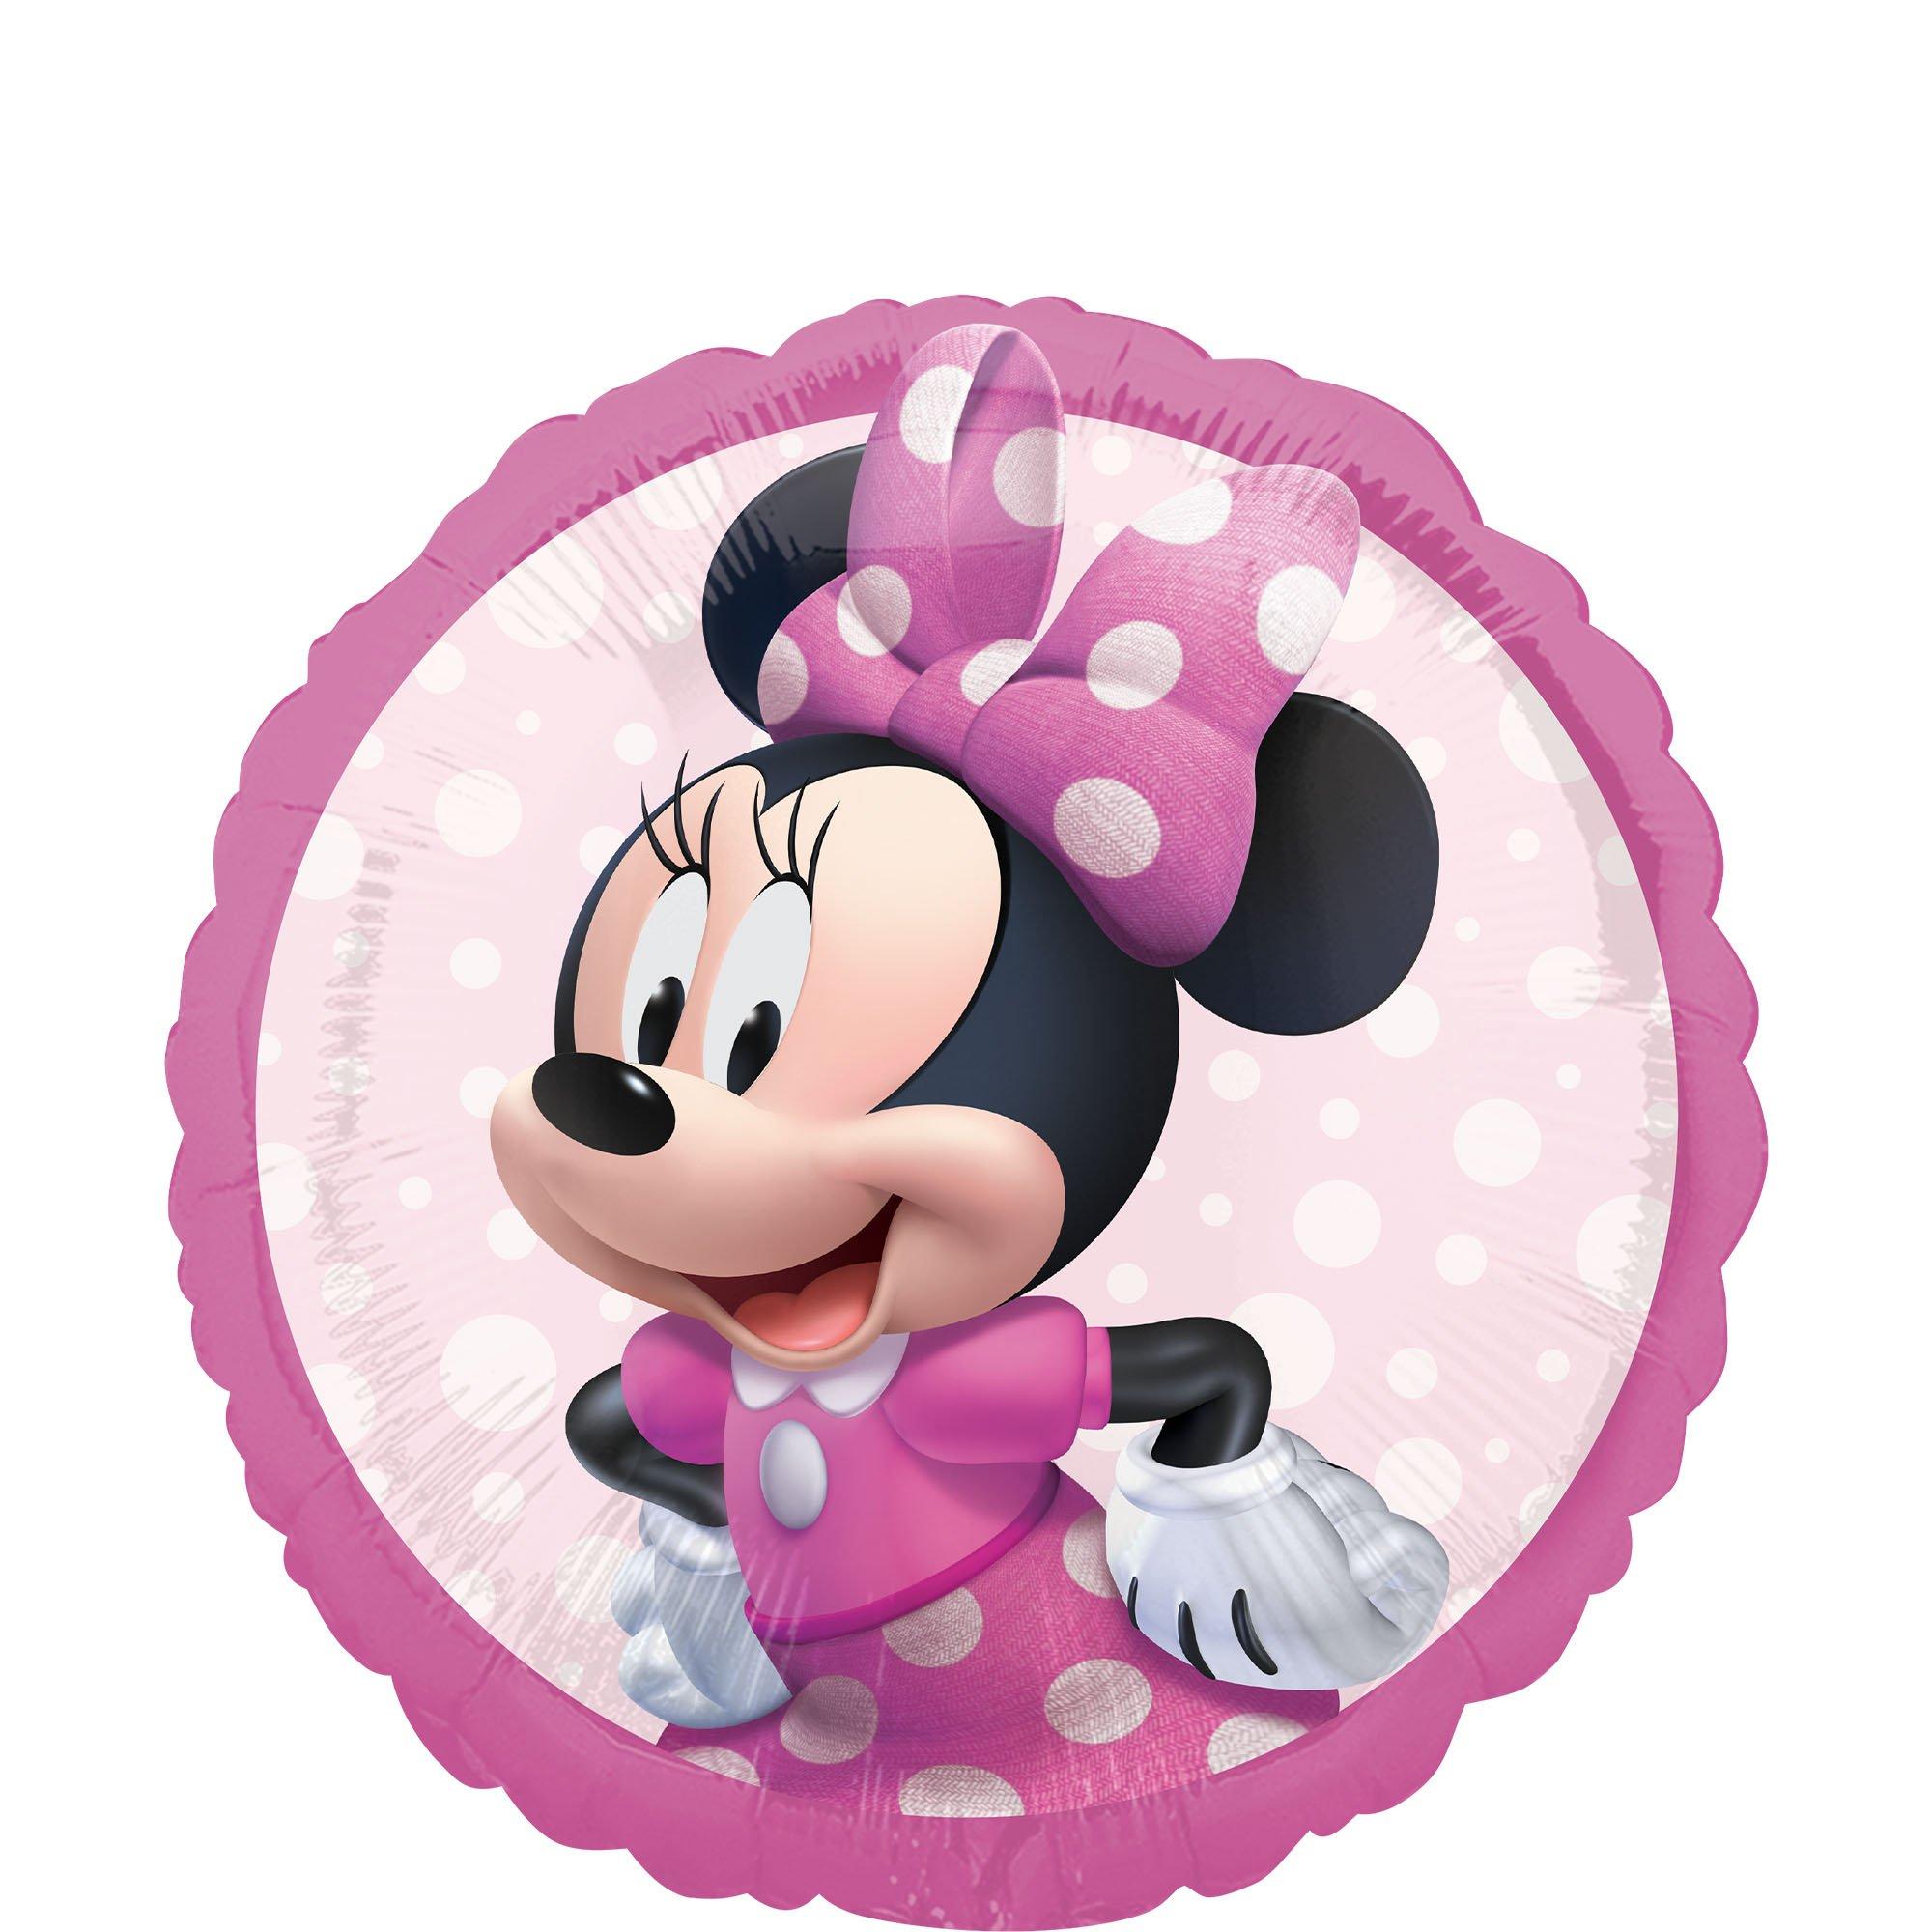 Minnie mouse Pink party  Fiesta de minnie mouse, Fiesta minnie, Decoracion  fiesta de minnie